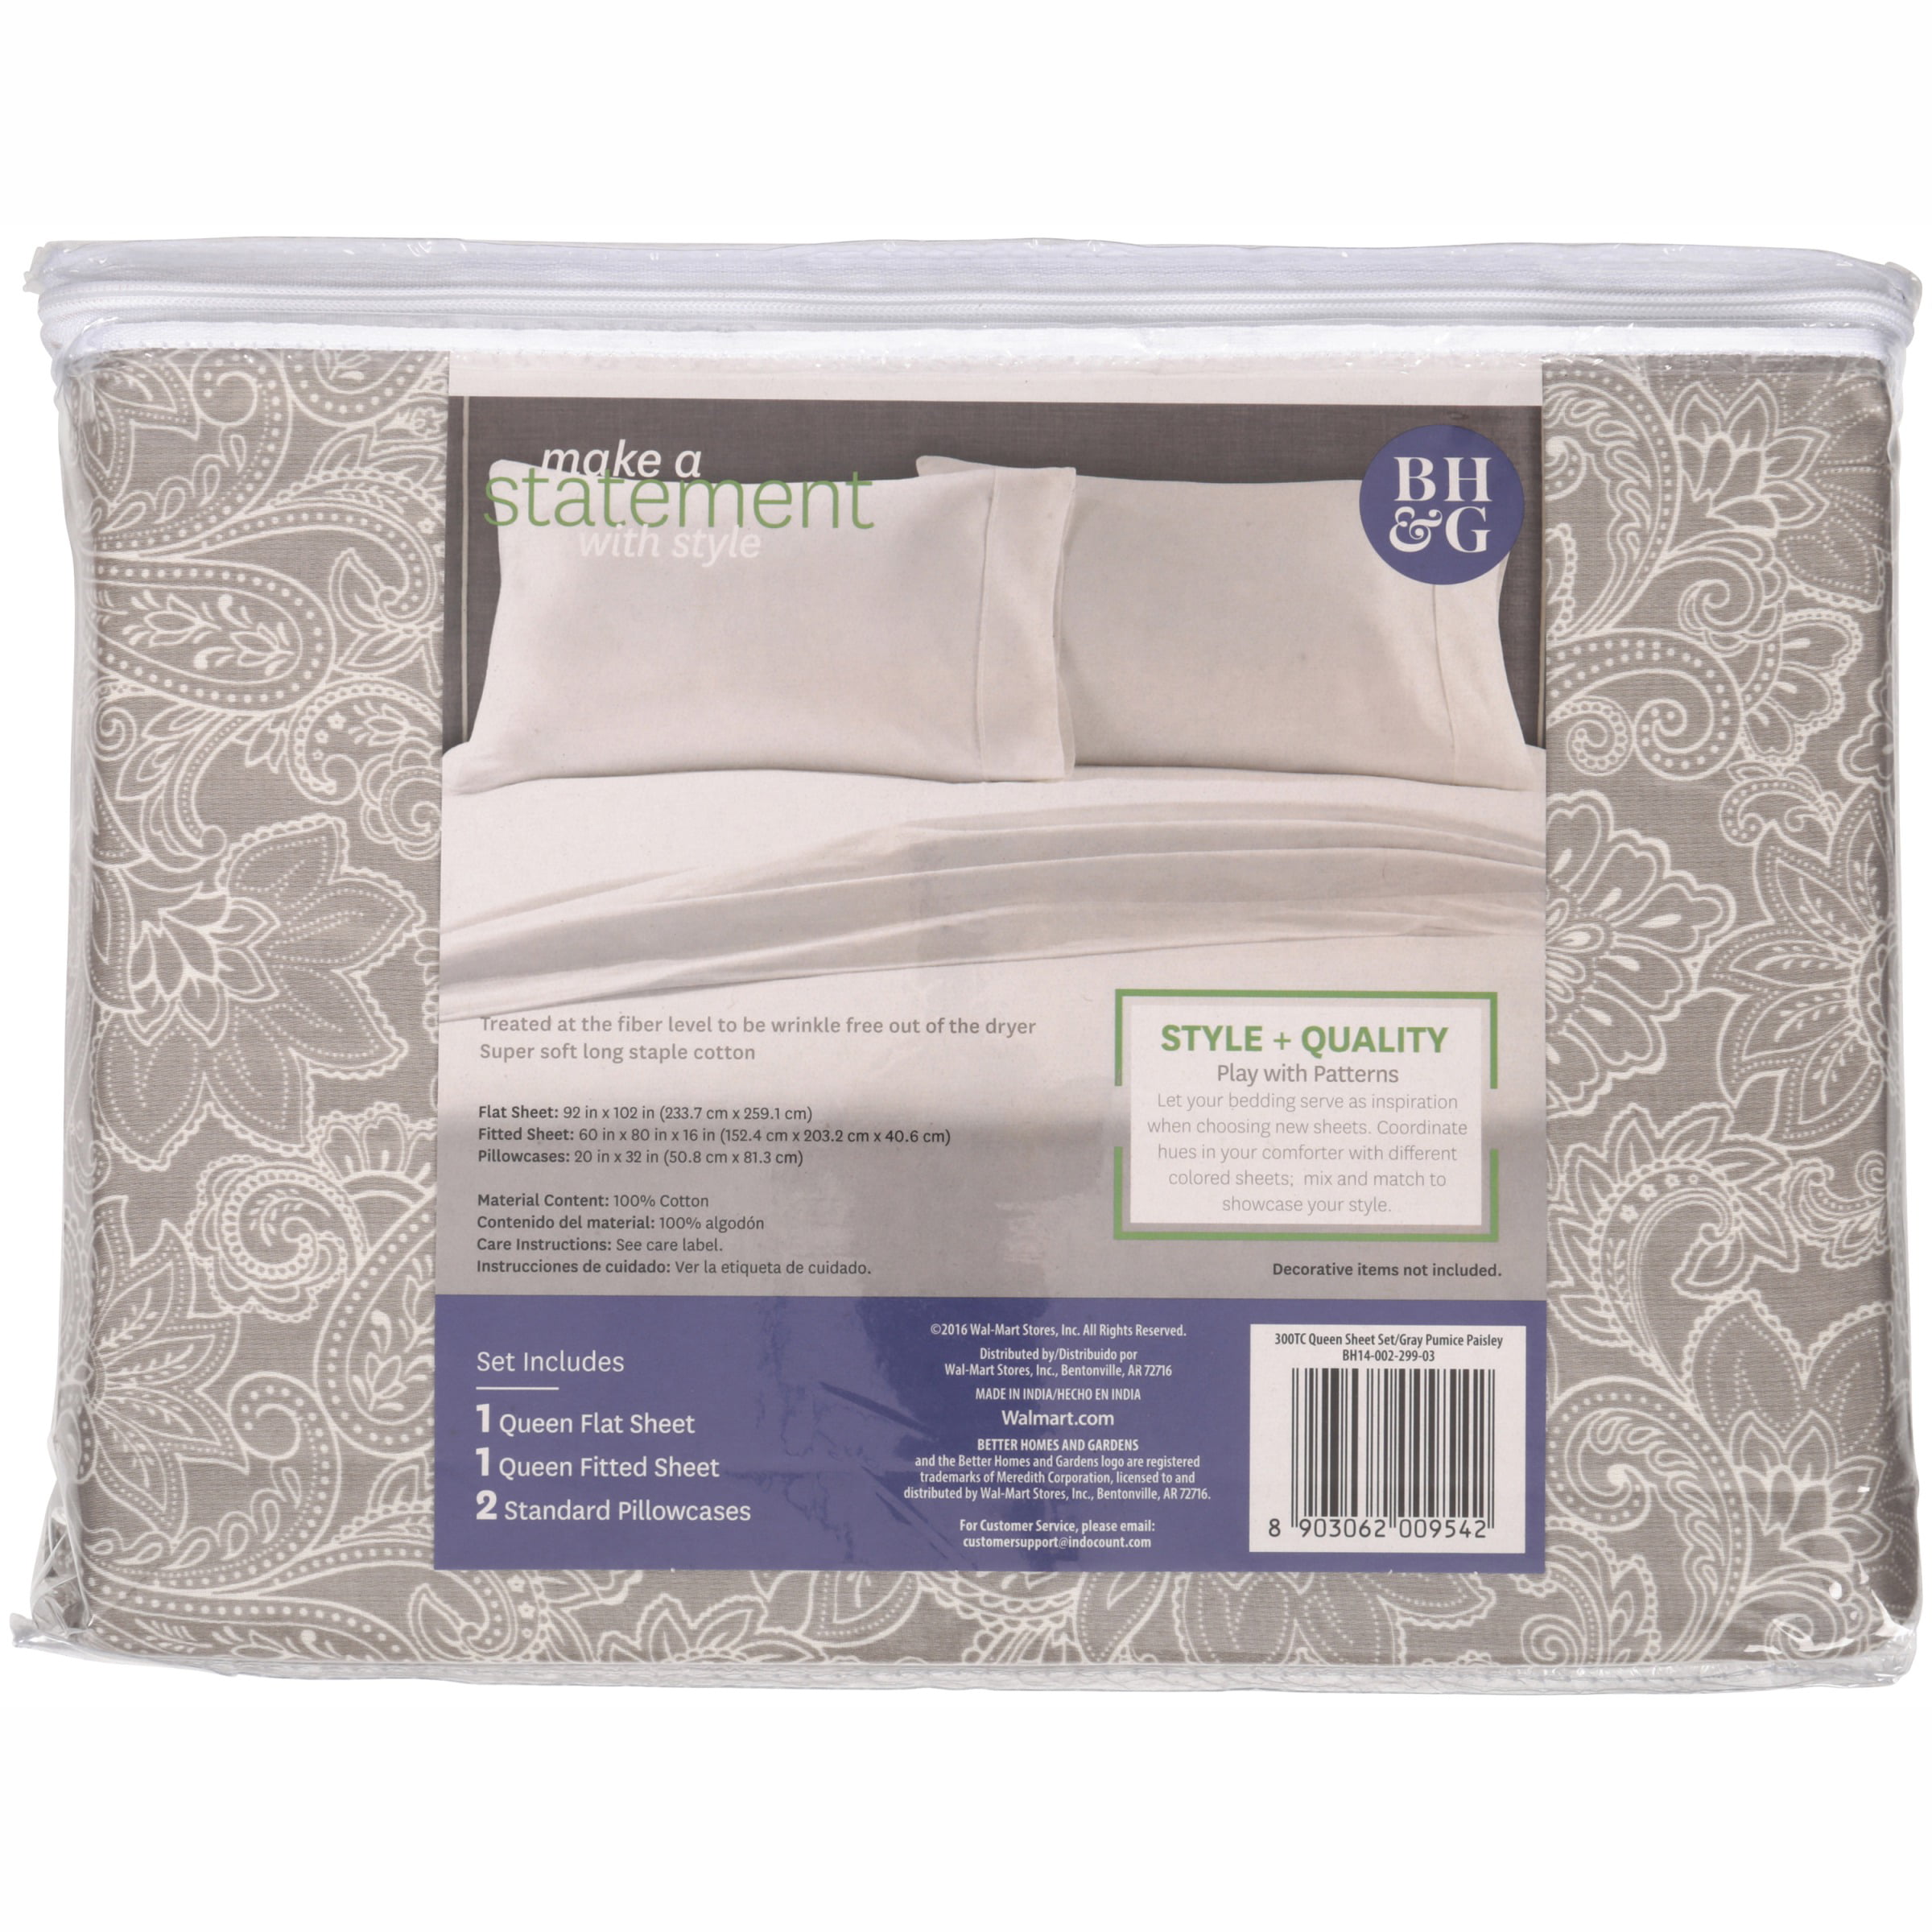 Fairy Sheets 32 Count (Unscented) Made in Sweden